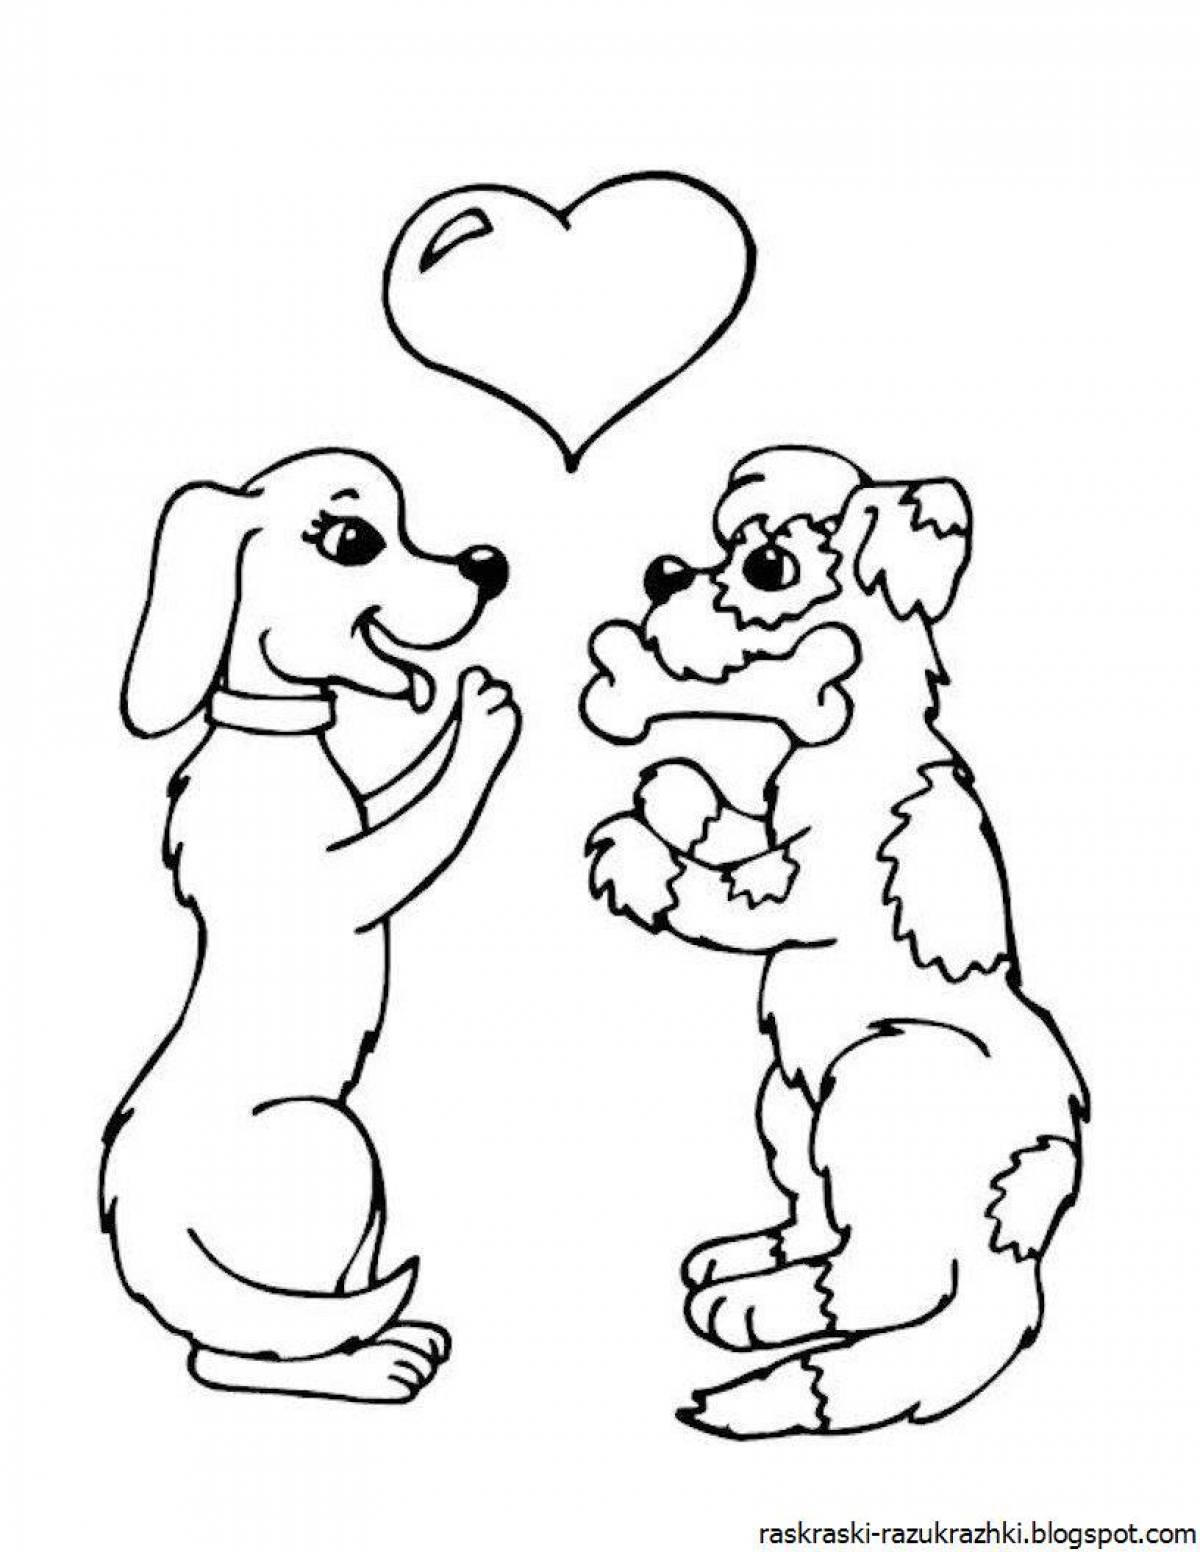 Live dog and cat coloring page